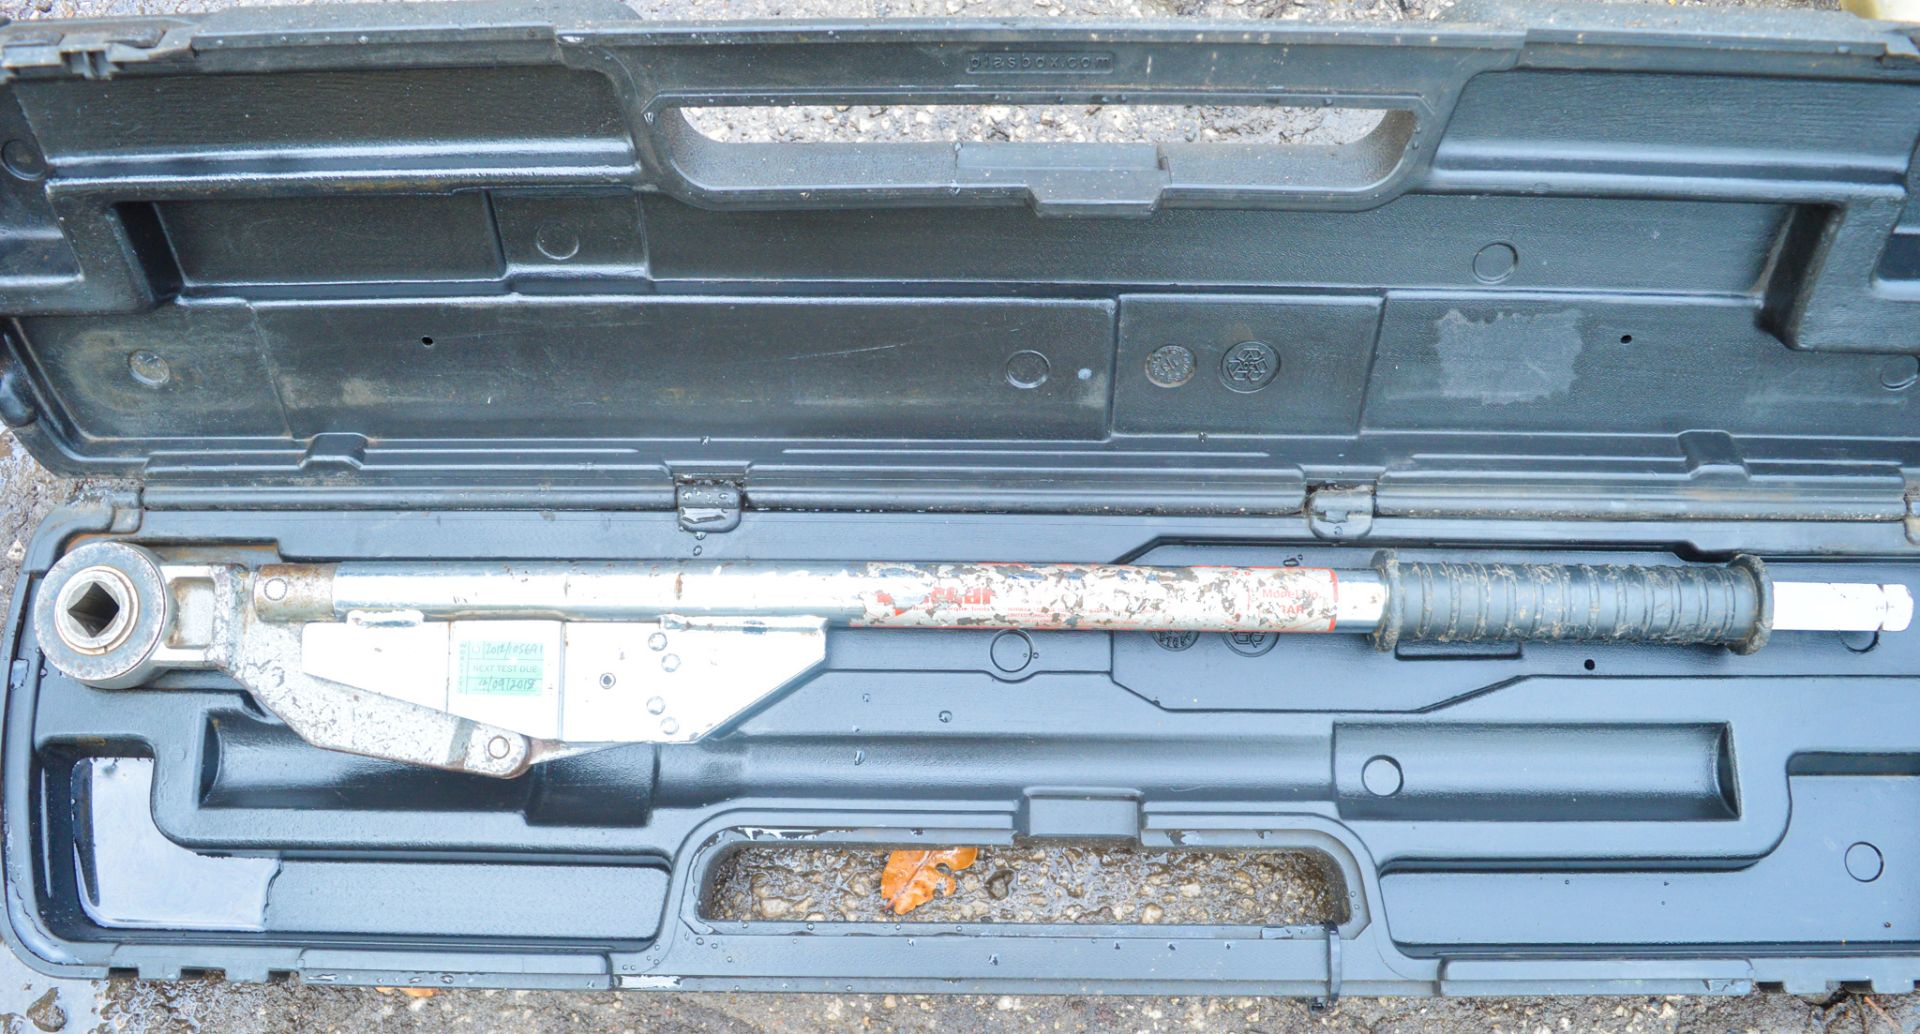 Hi-Force torque wrench c/w carry case